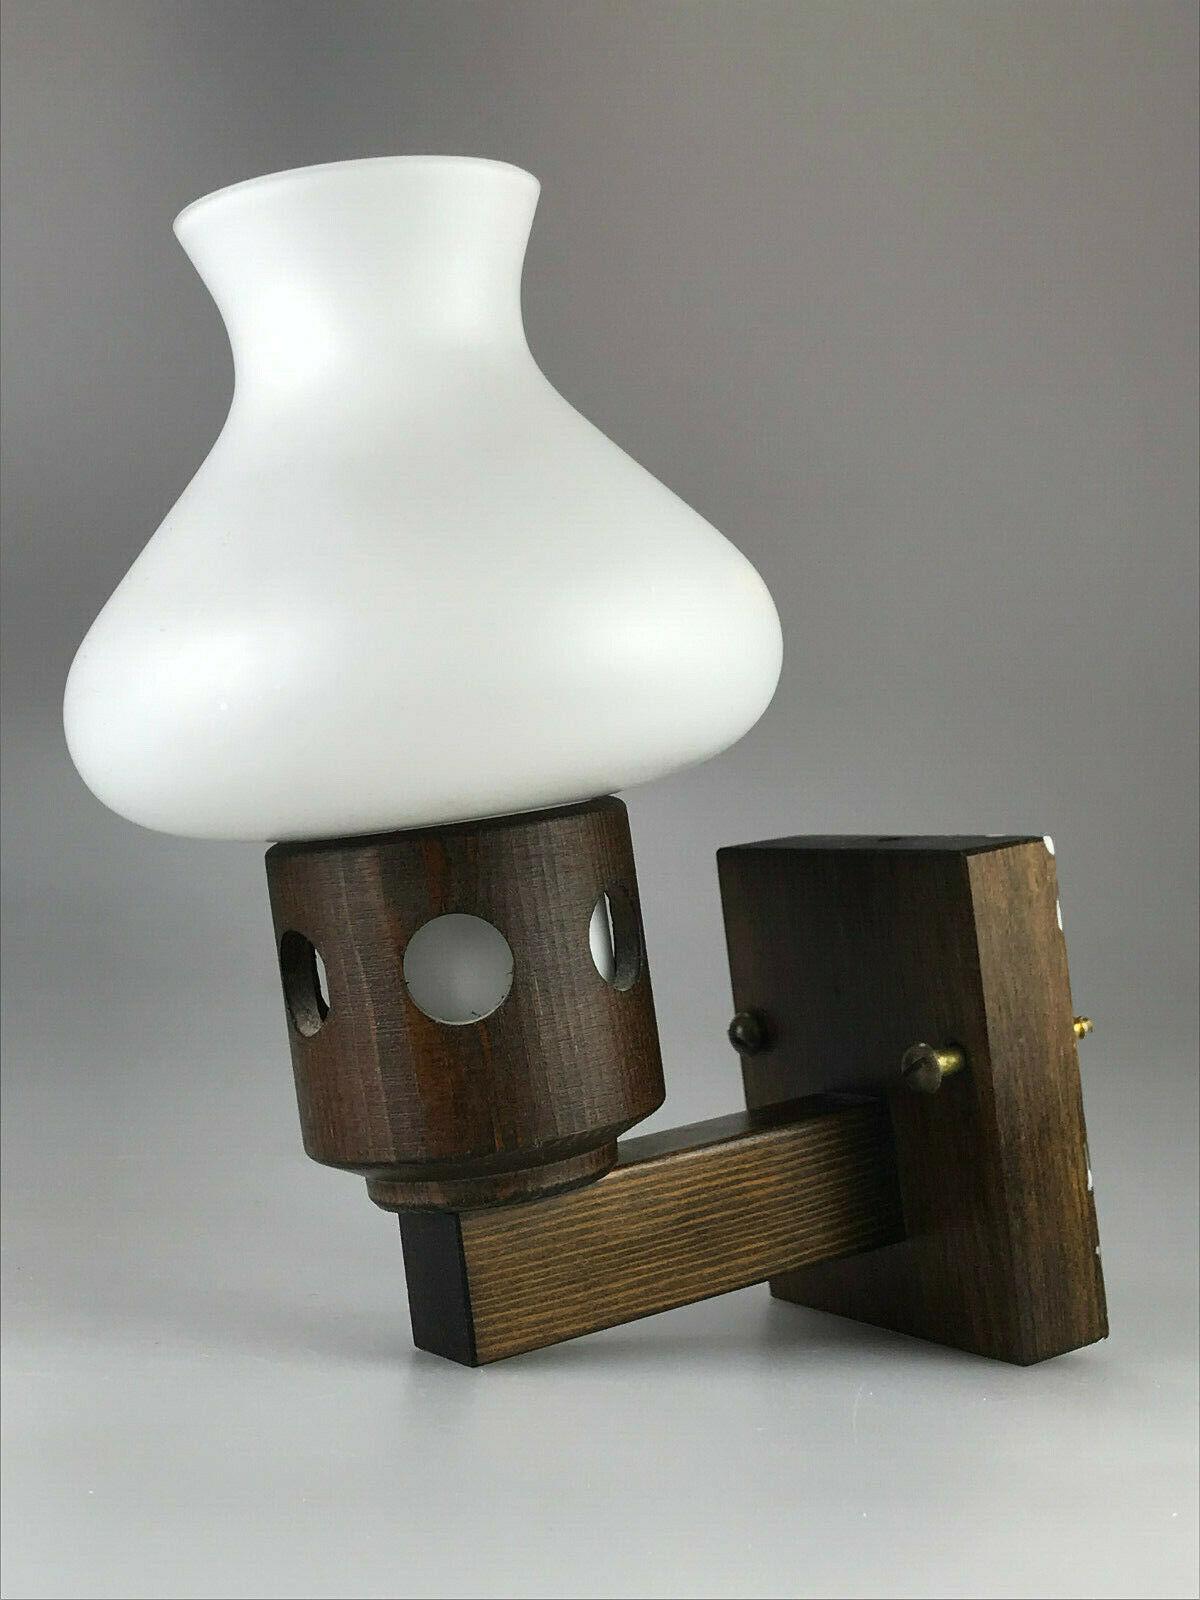 European 60s 70s Wall Lamp Vitrika Lamp Light Wall Sconce Space Age Design